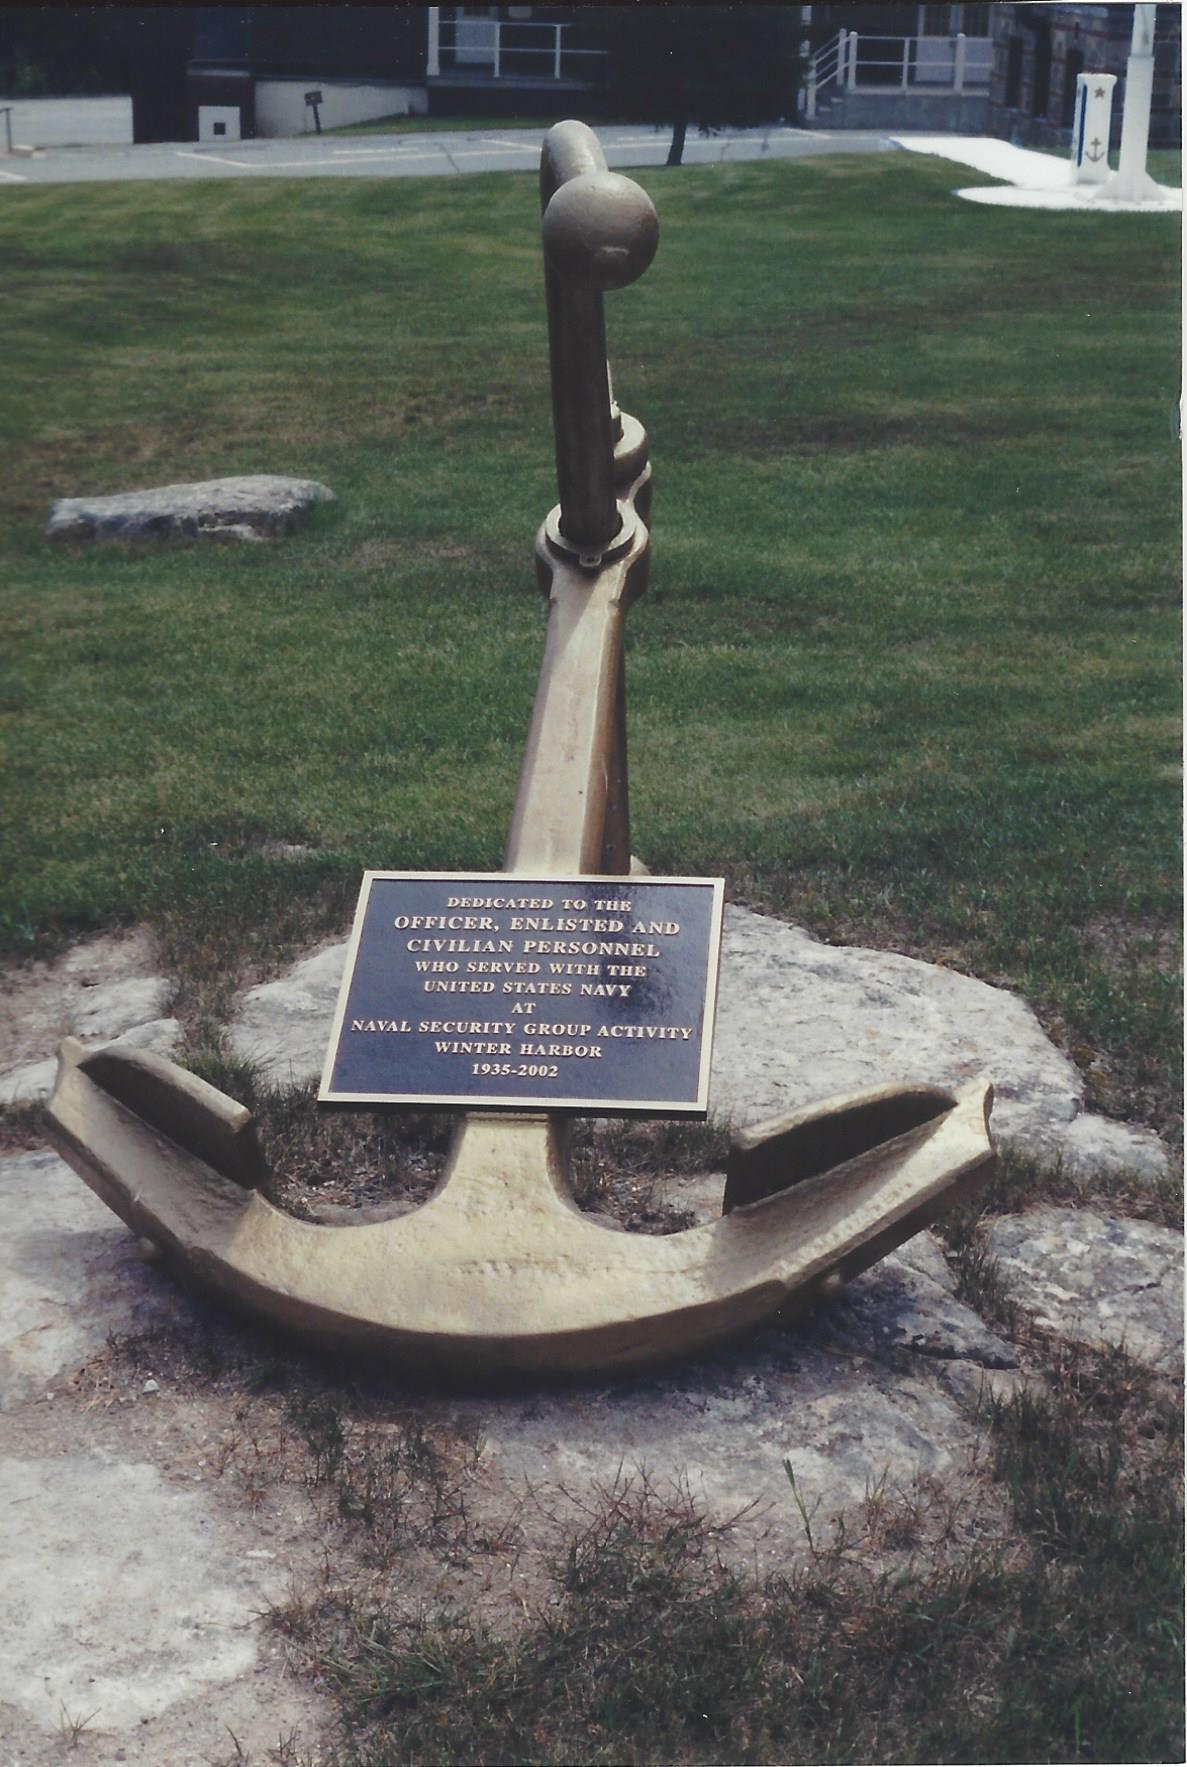 Anchor to commemorate Navy in foreground, grass in background